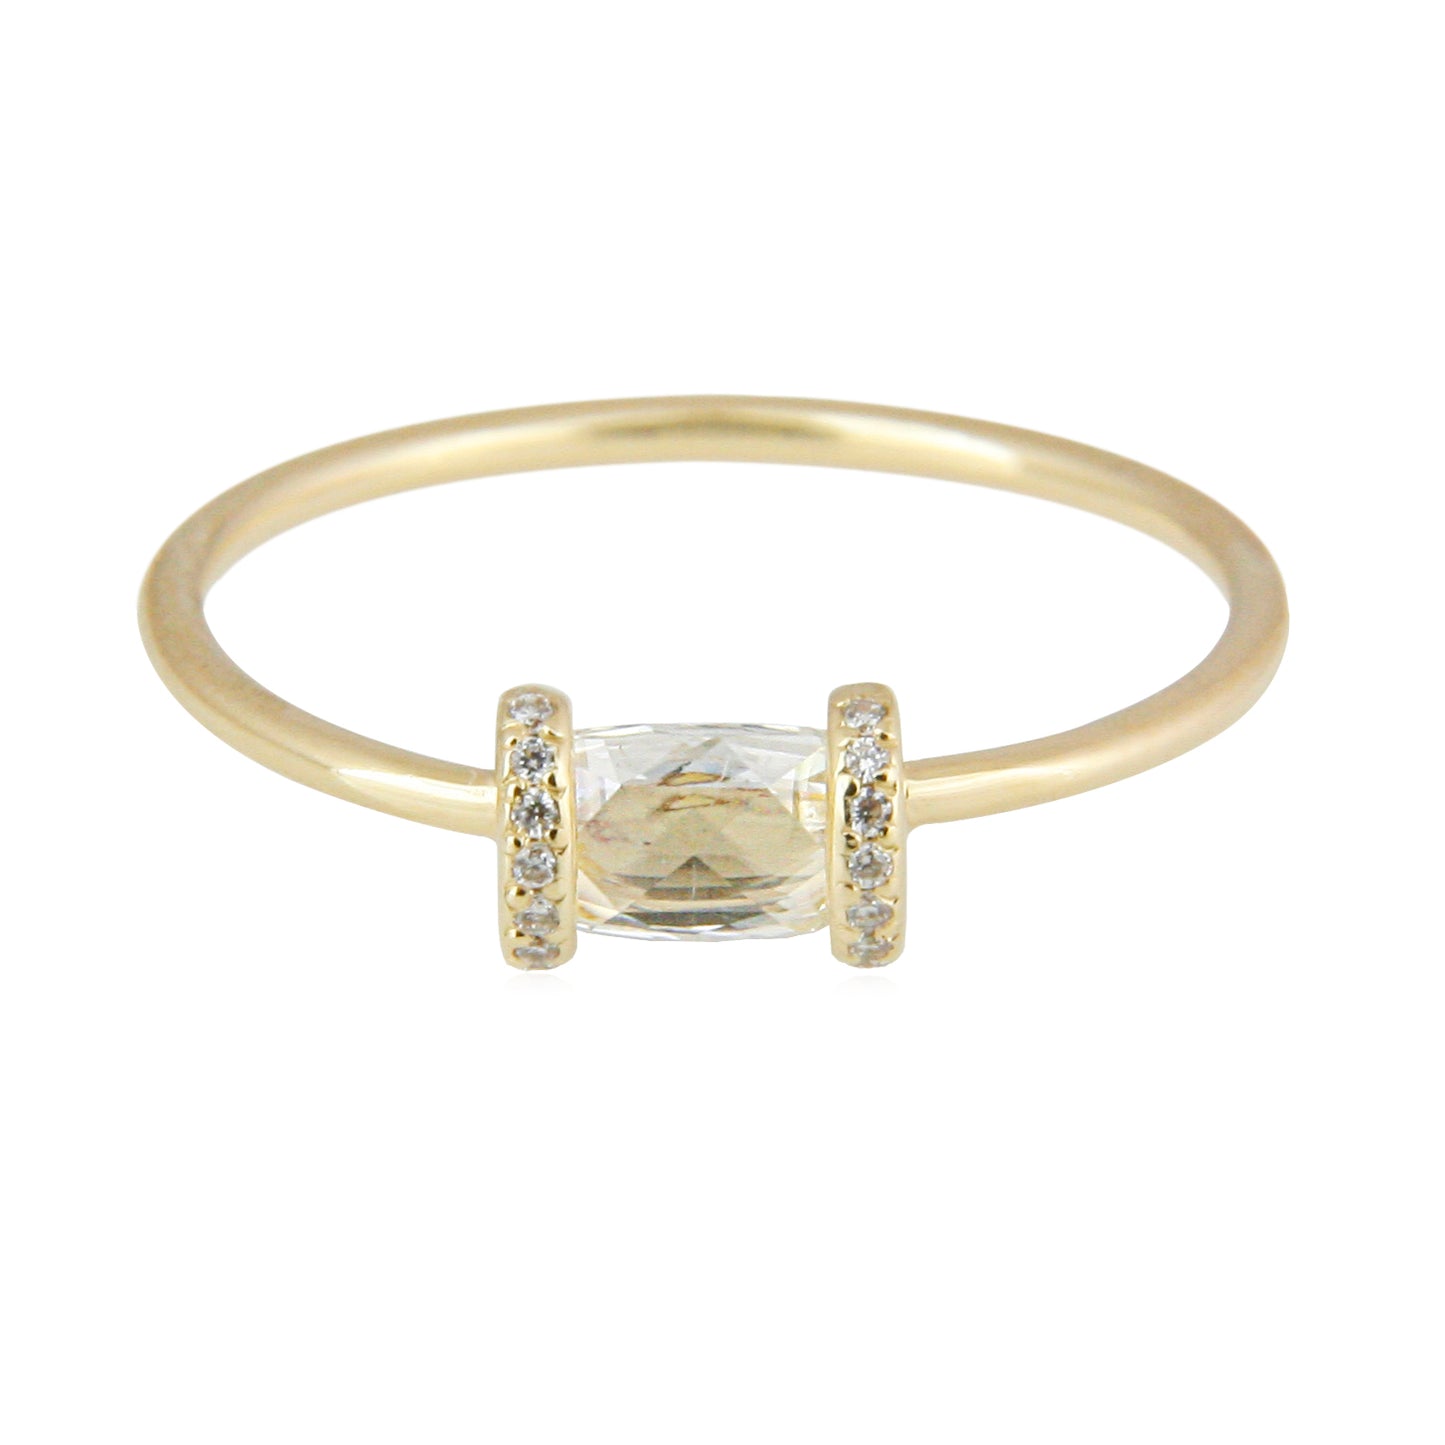 Sweet Pea 18ct yellow gold one-off engagement ring with rose cut diamond and pave set diamond bars either side.